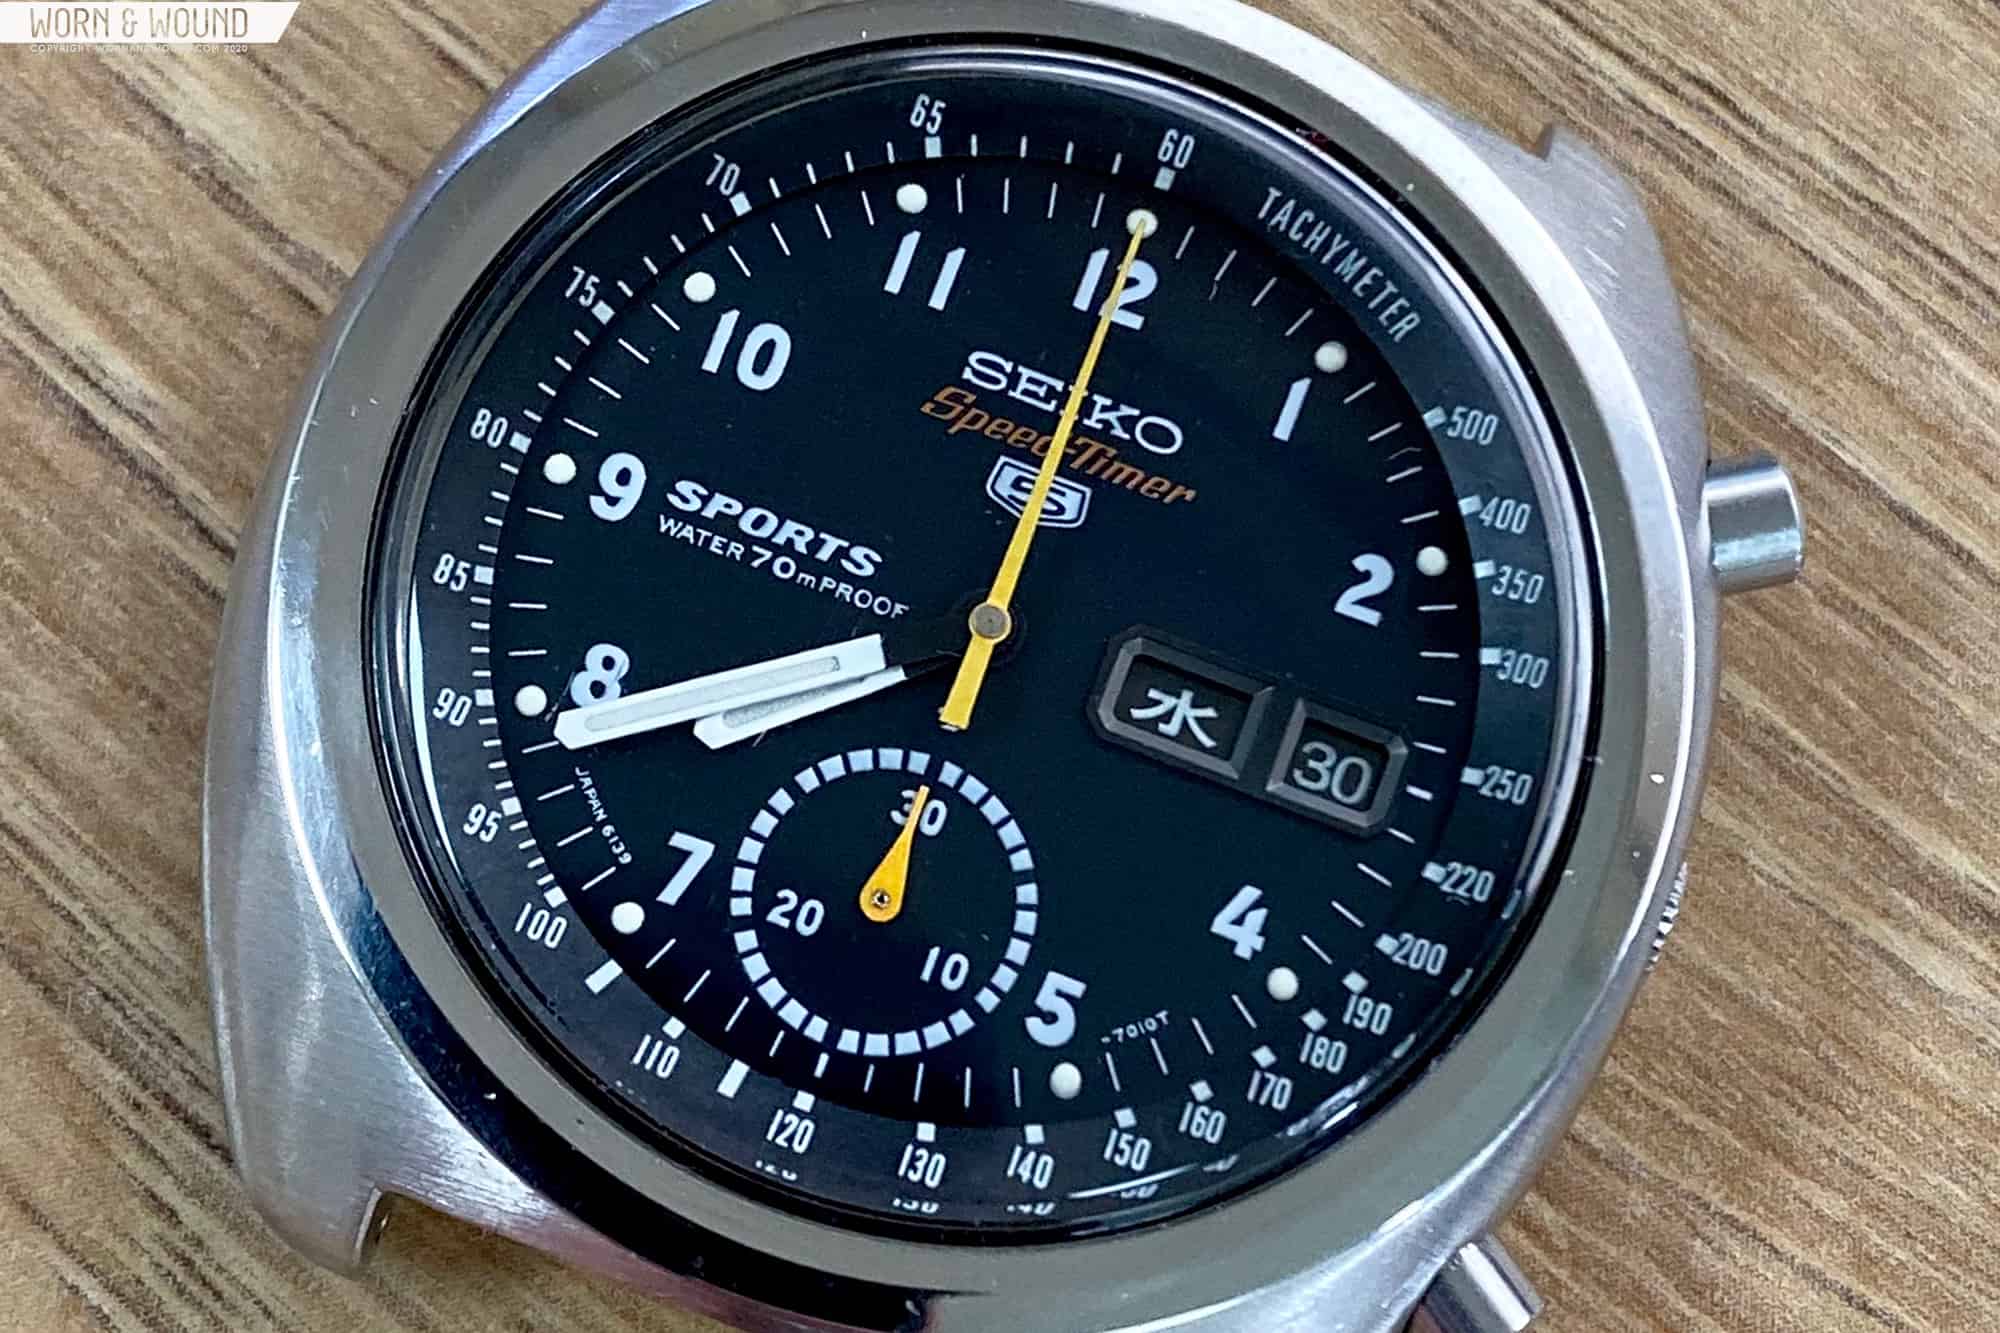 Watchmaker's Bench: Breaking Down a Seiko 6139 Chronograph - Worn ...